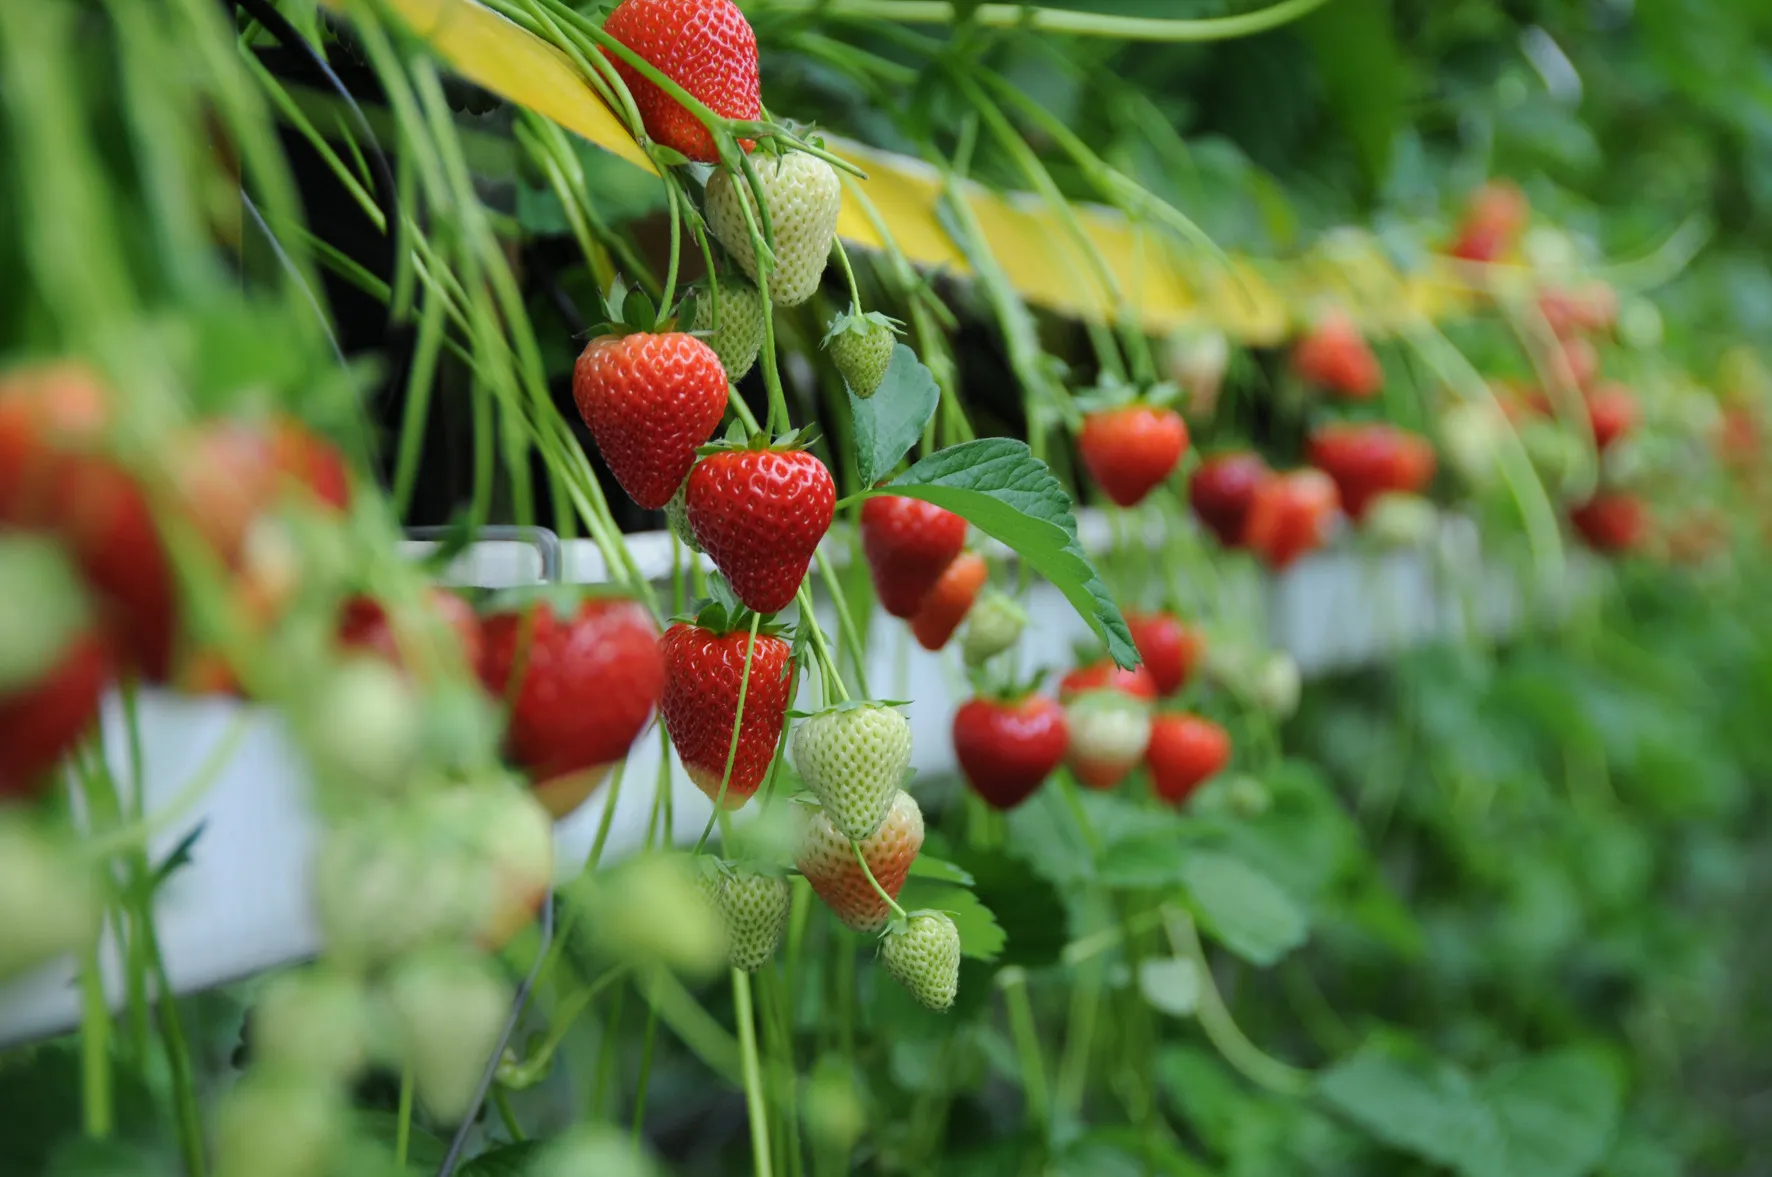 Bayer expands fruit and vegetable business to strawberries